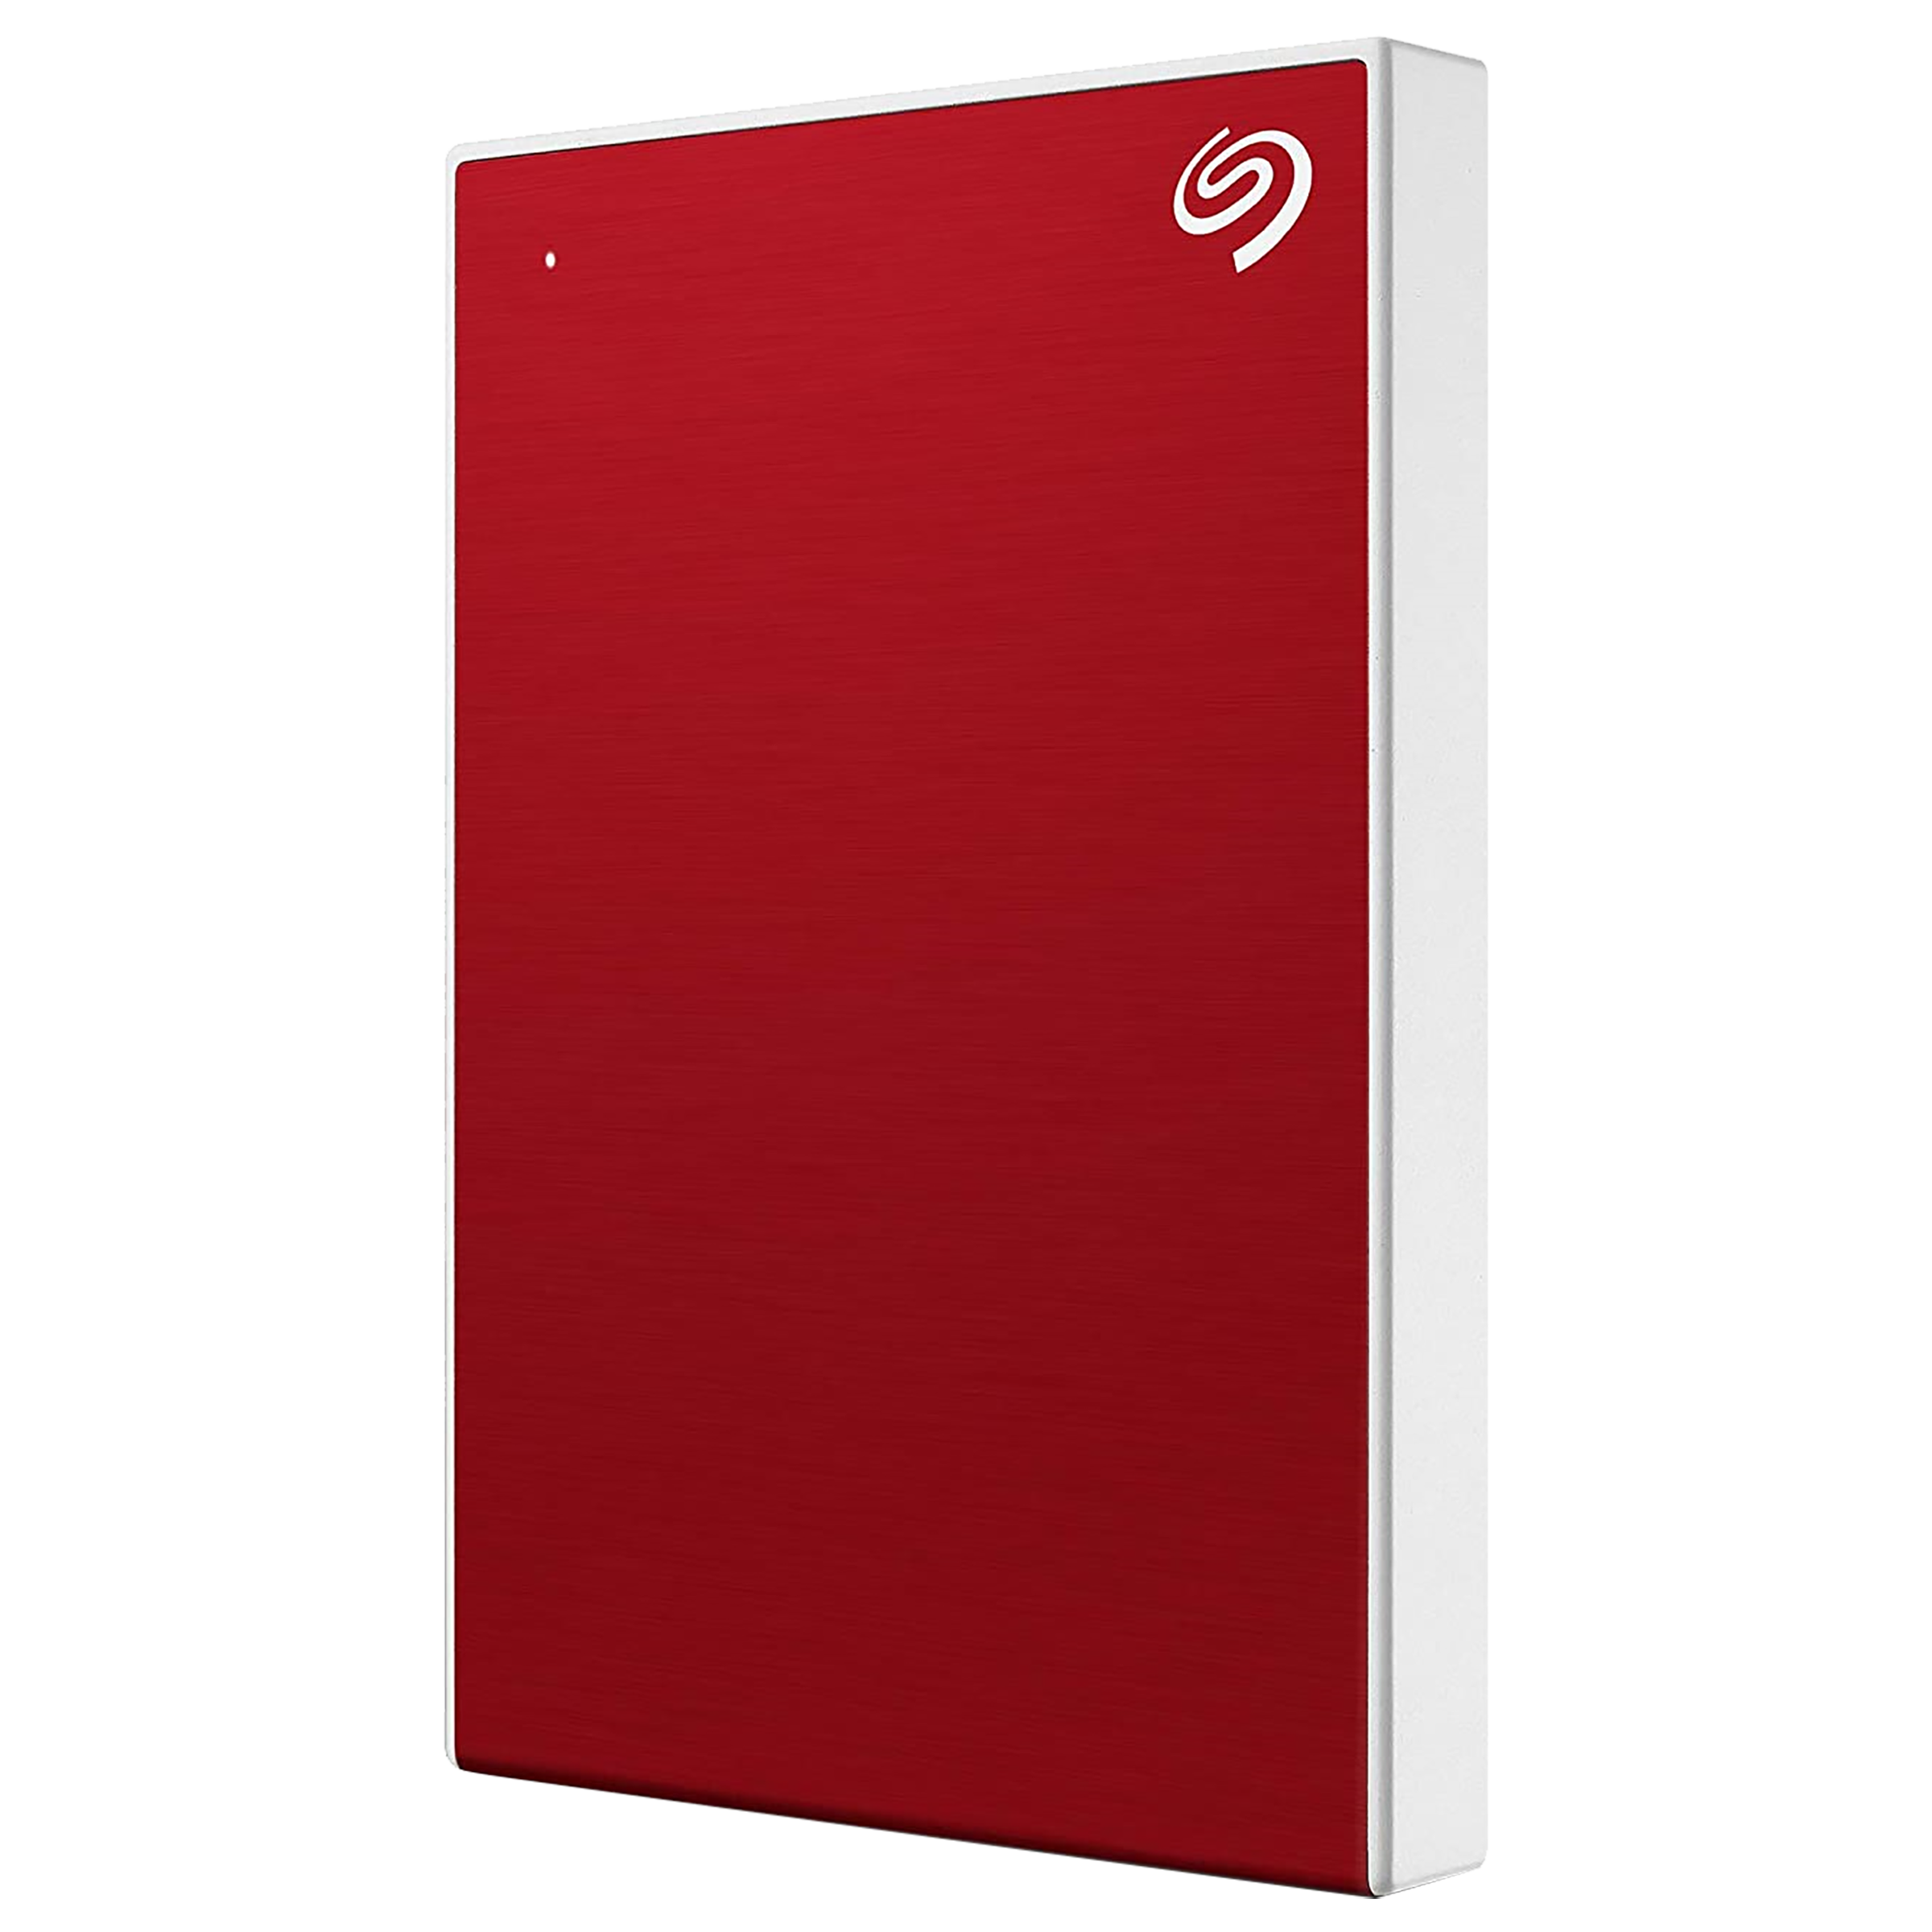 Seagate - Seagate One Touch 1TB USB 3.0 Hard Disk Drive (Easy Data Backup, STKY1000403, Red)